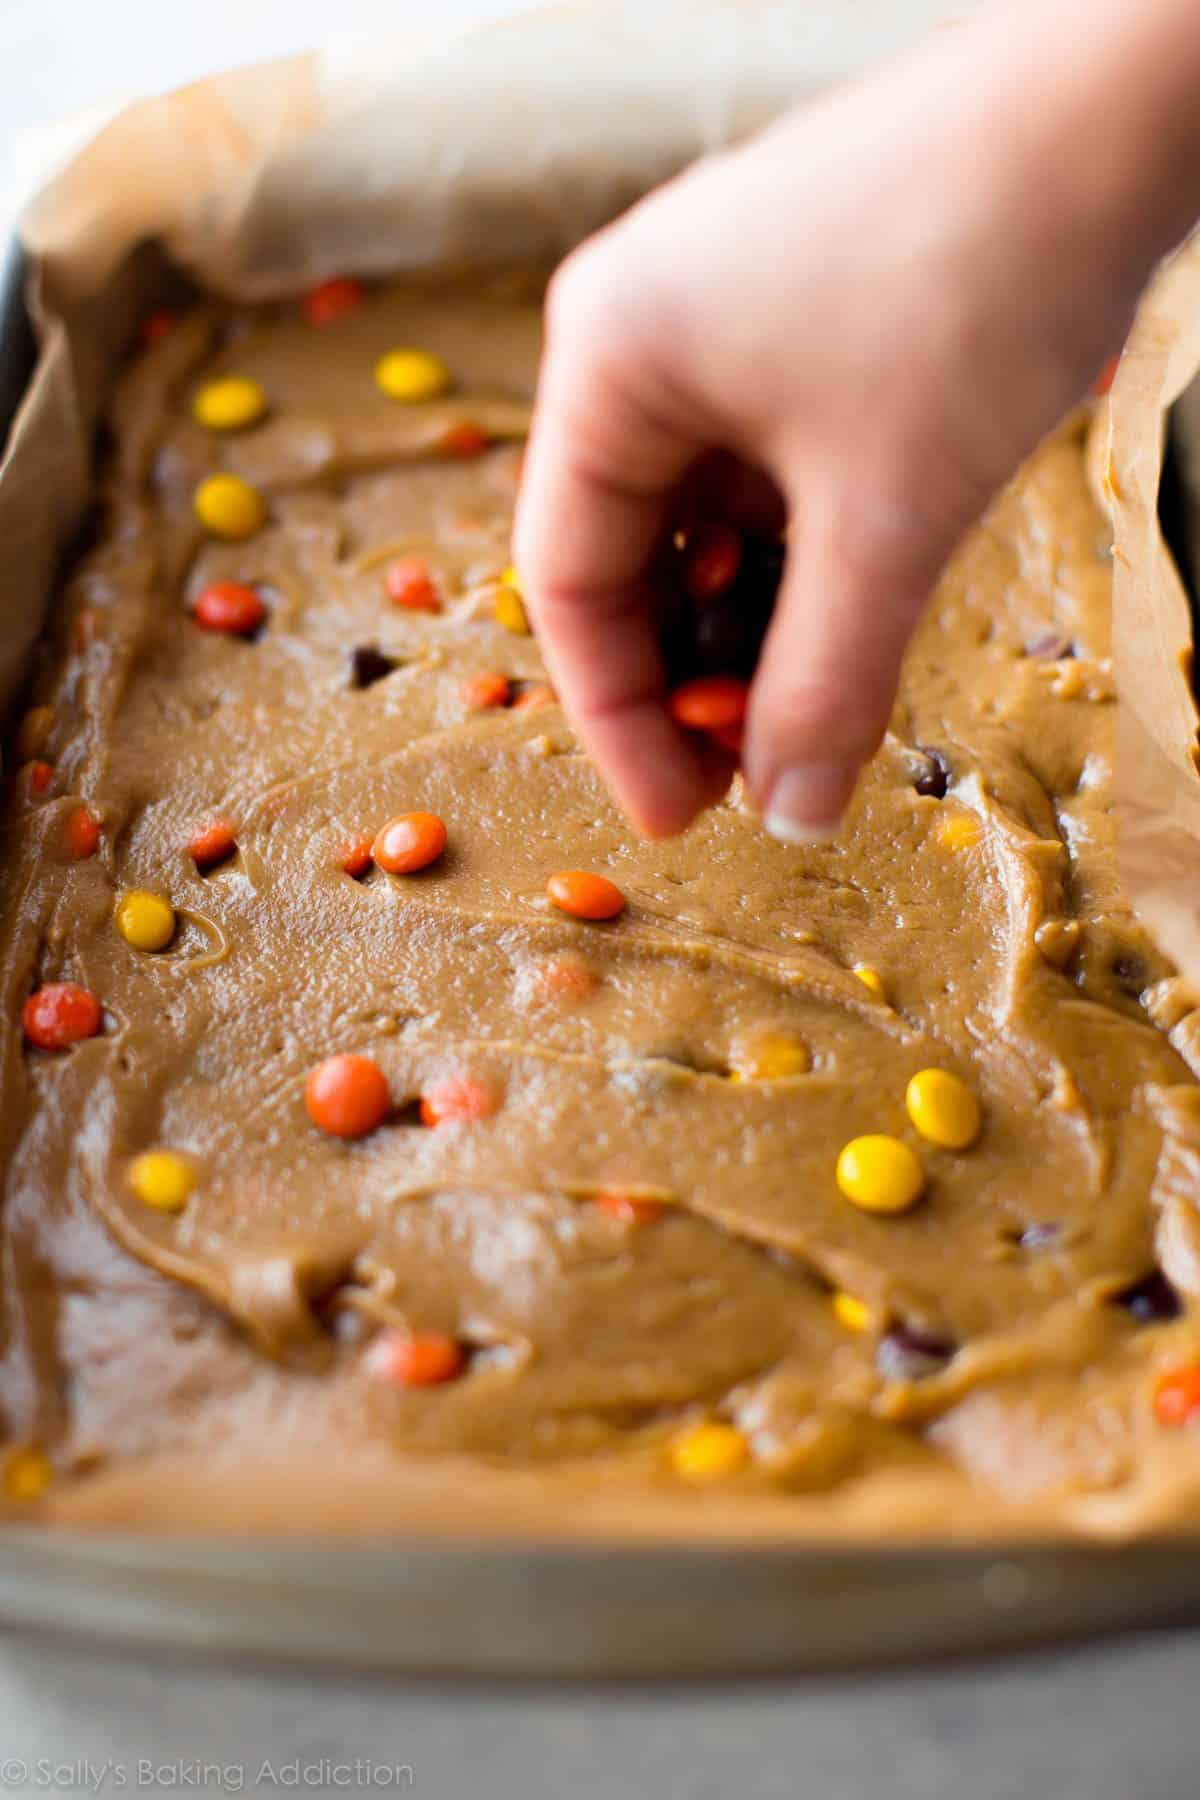 hands sprinkling Reese's Pieces onto peanut butter blondie batter in a baking pan